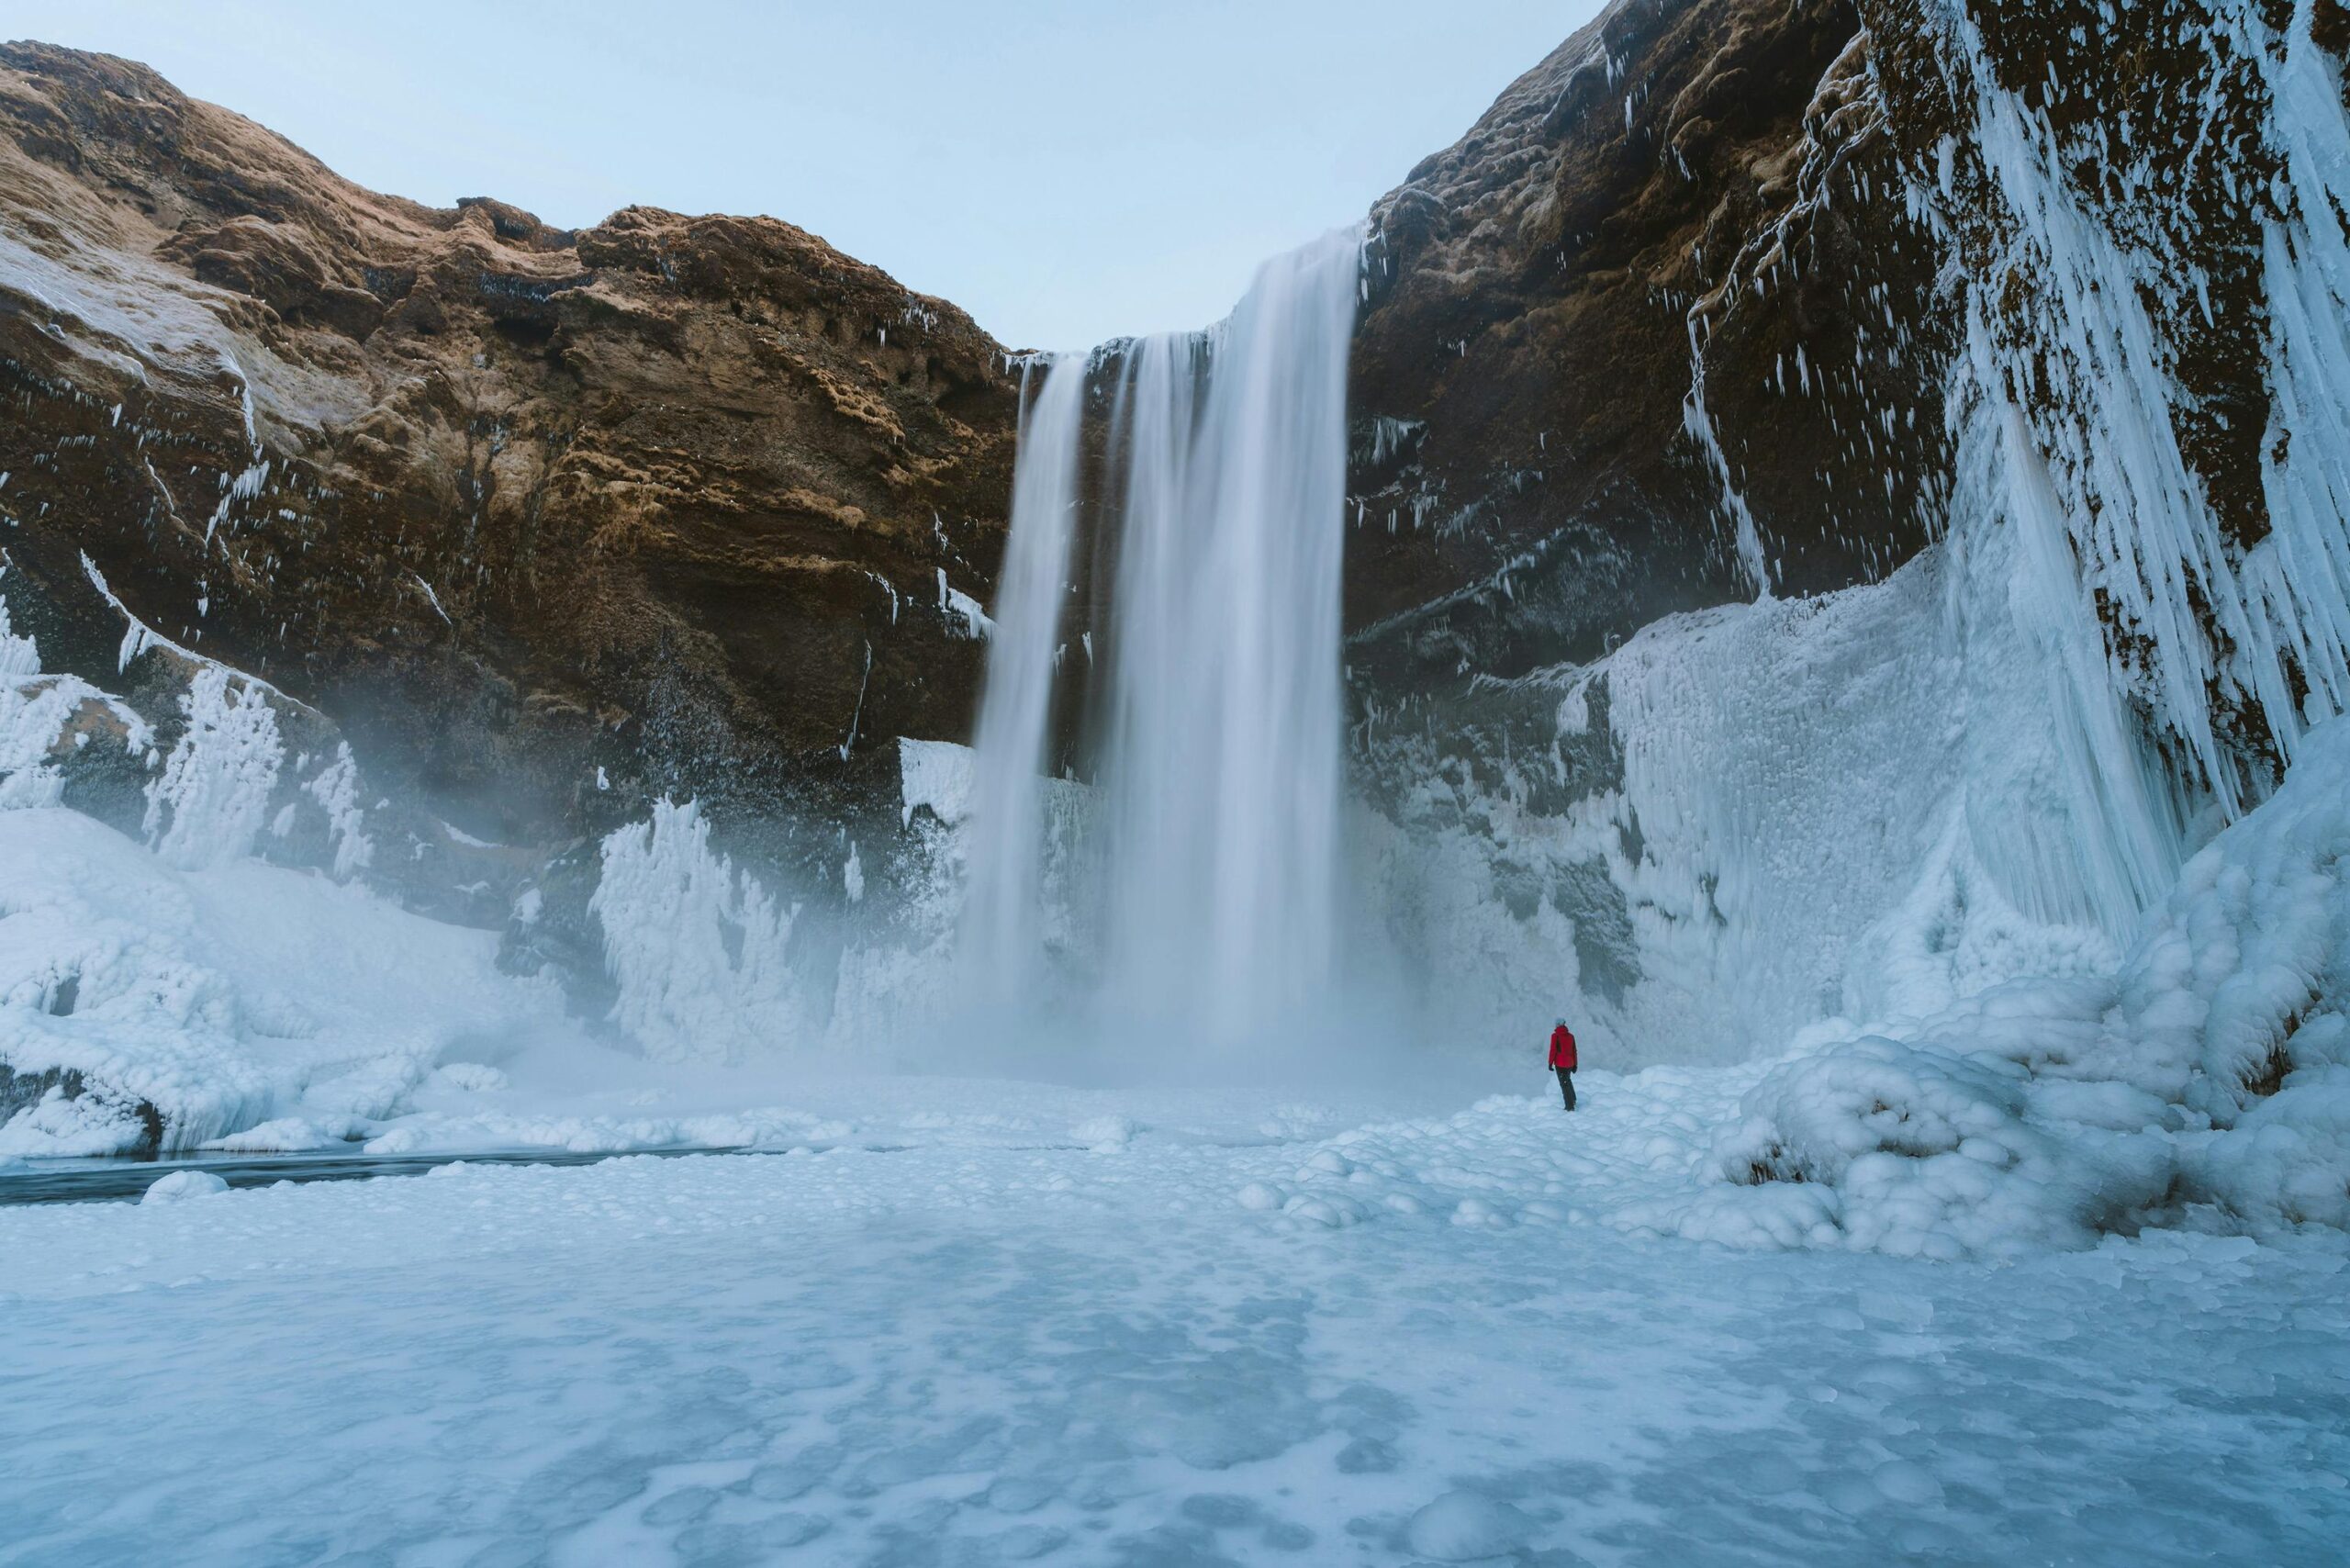 Iceland – The Land of Fire and Ice